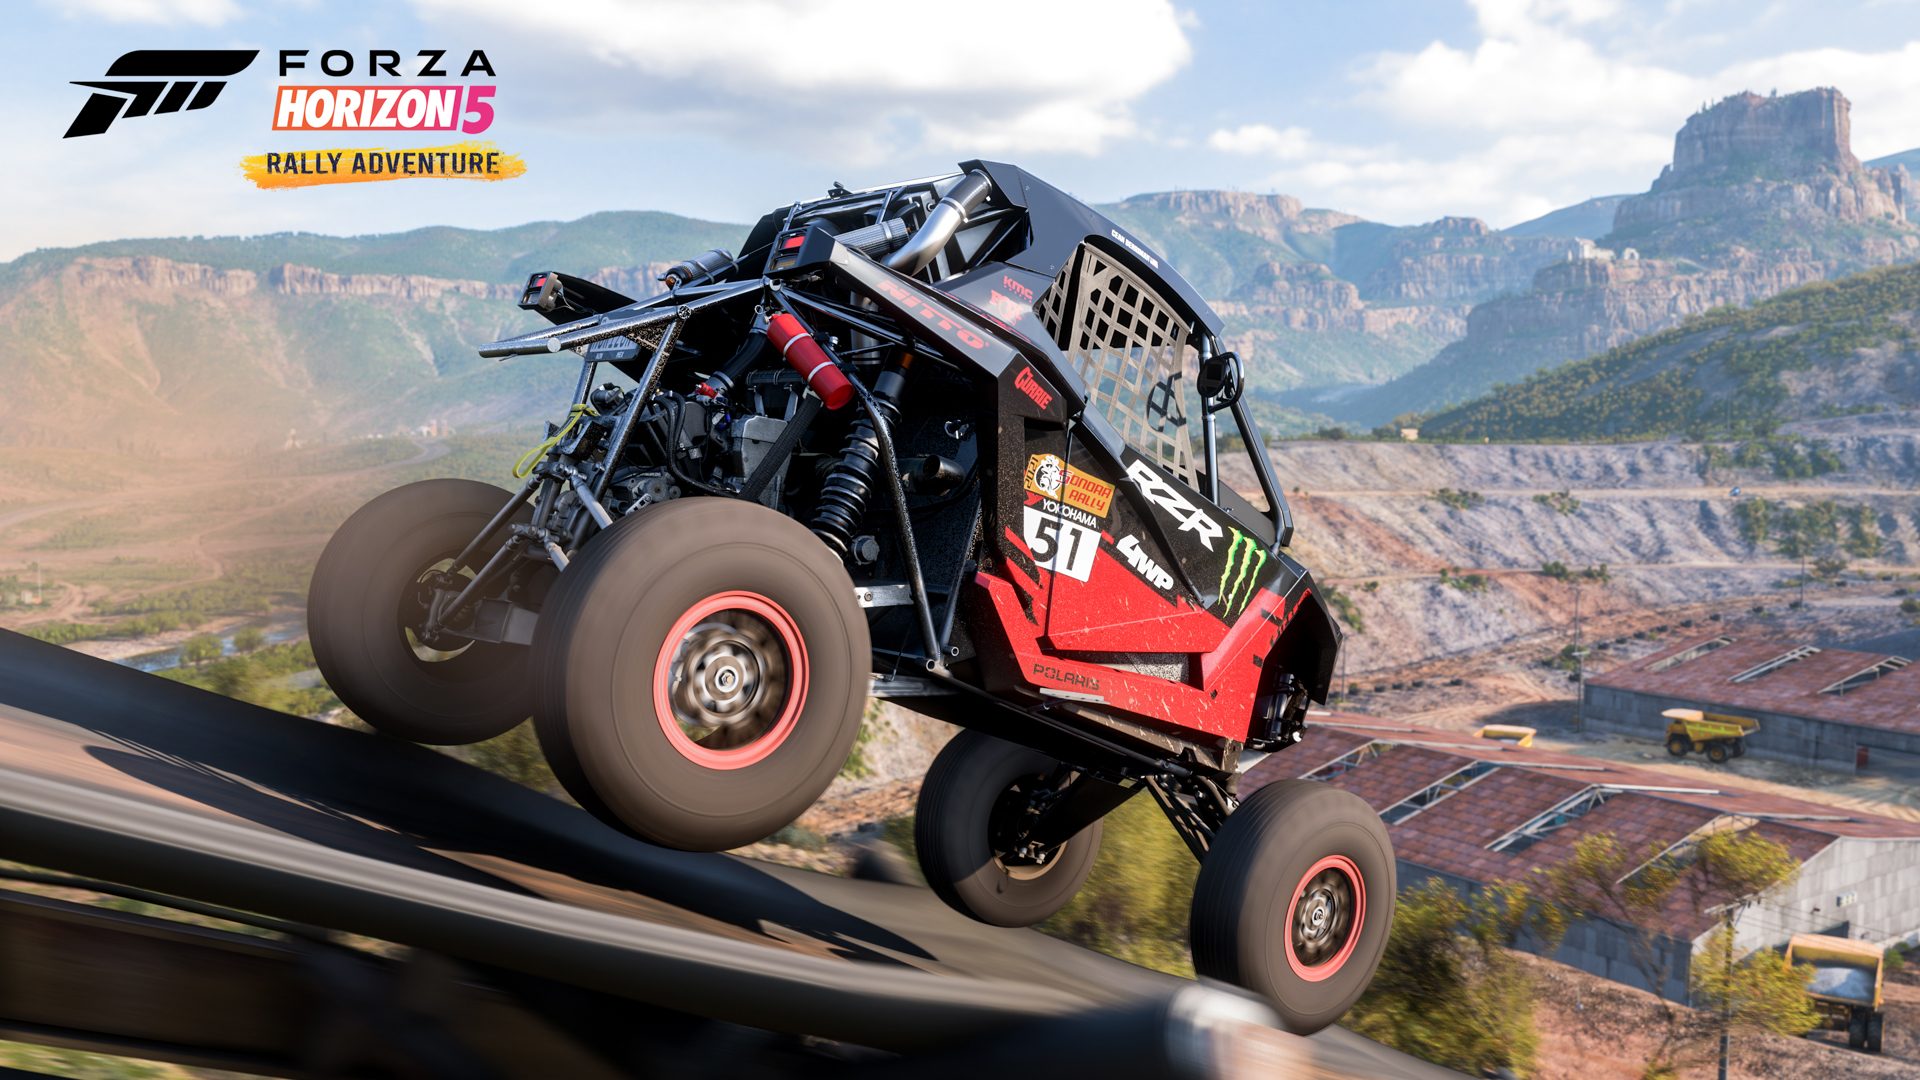 fh5-rally_adventure_expansion-polaris_rzr_pro_xp_factory_racing_limited_edition-steam-1920x1080_wm-aae03088753b937c2086-2855136